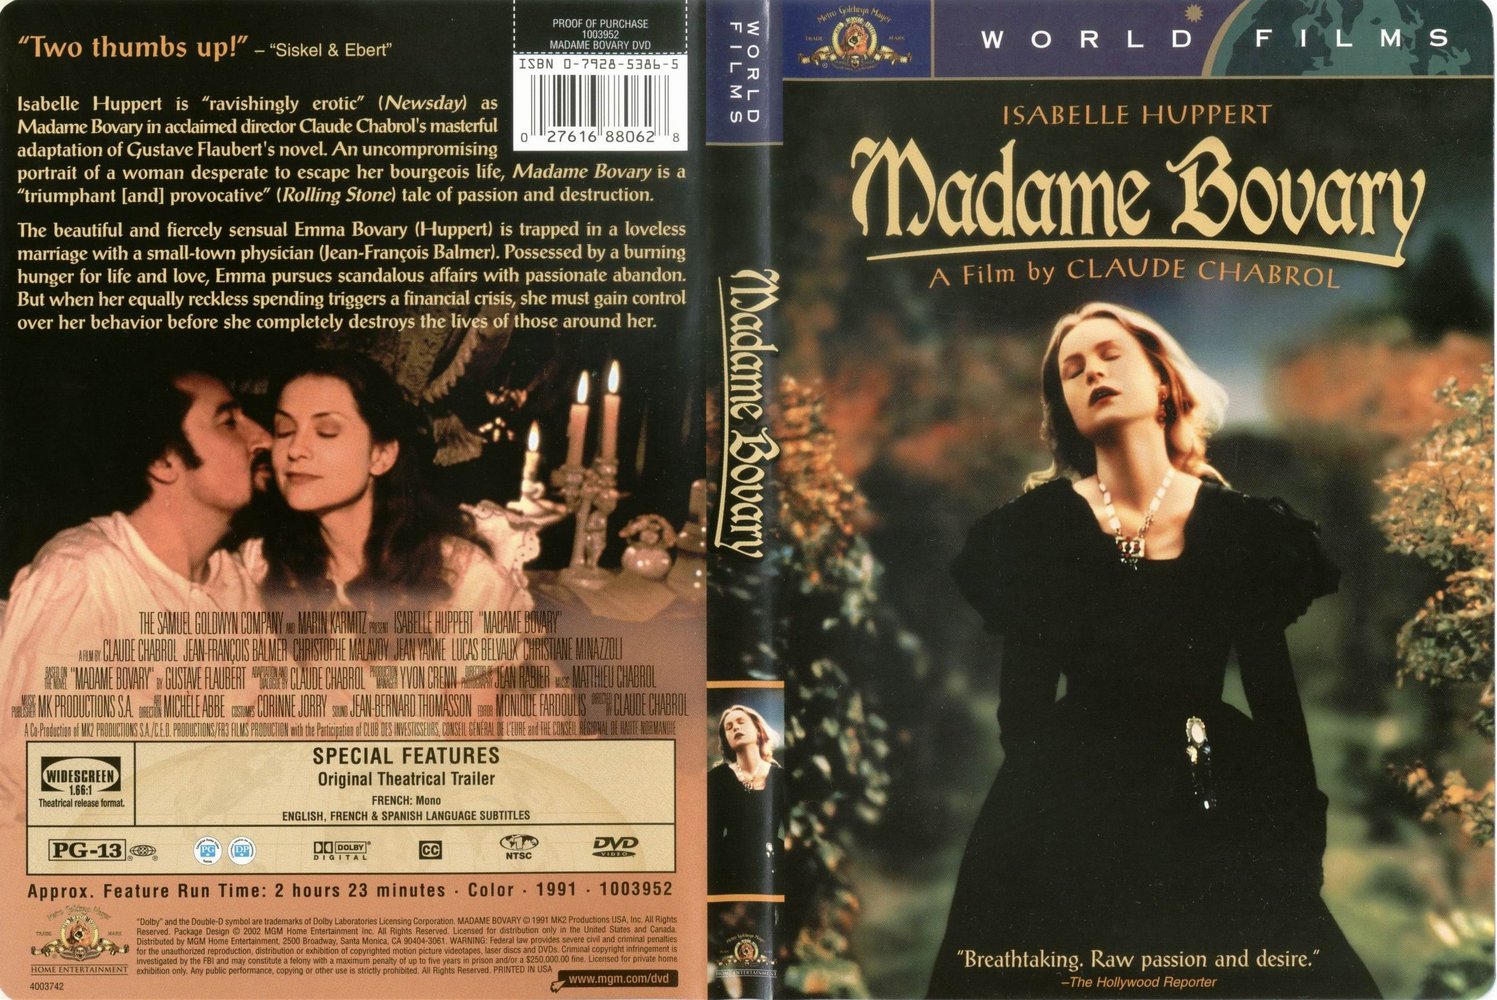 Jaquette DVD Madame Bovary Zone 1